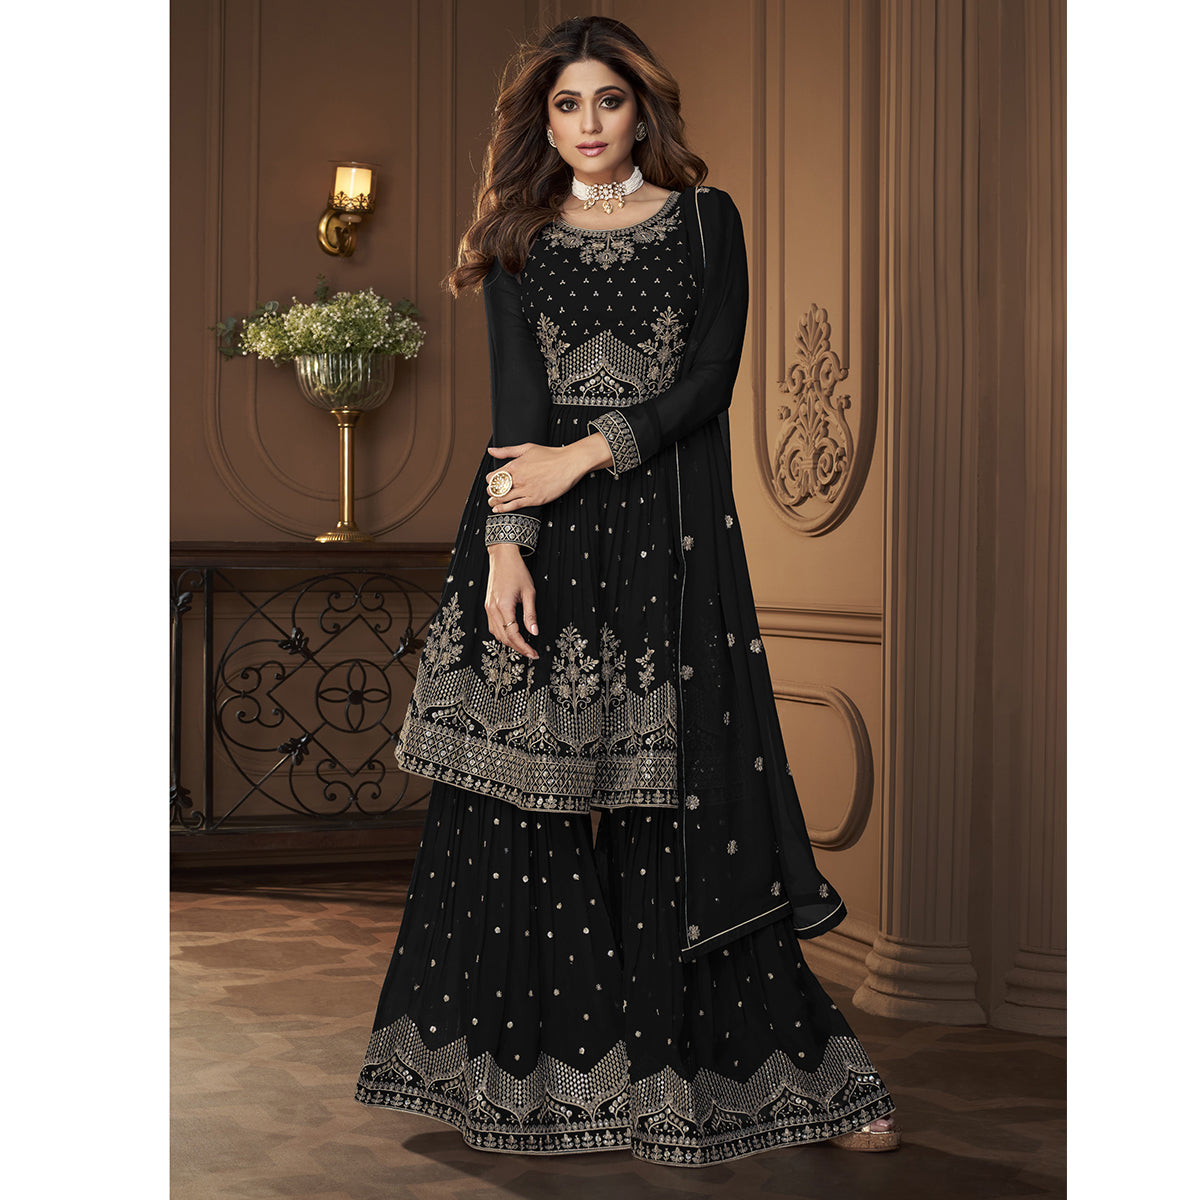 Shafnufab Heavy Faux Georgette Semi Stitched Plazzo Suit In Black COLOR